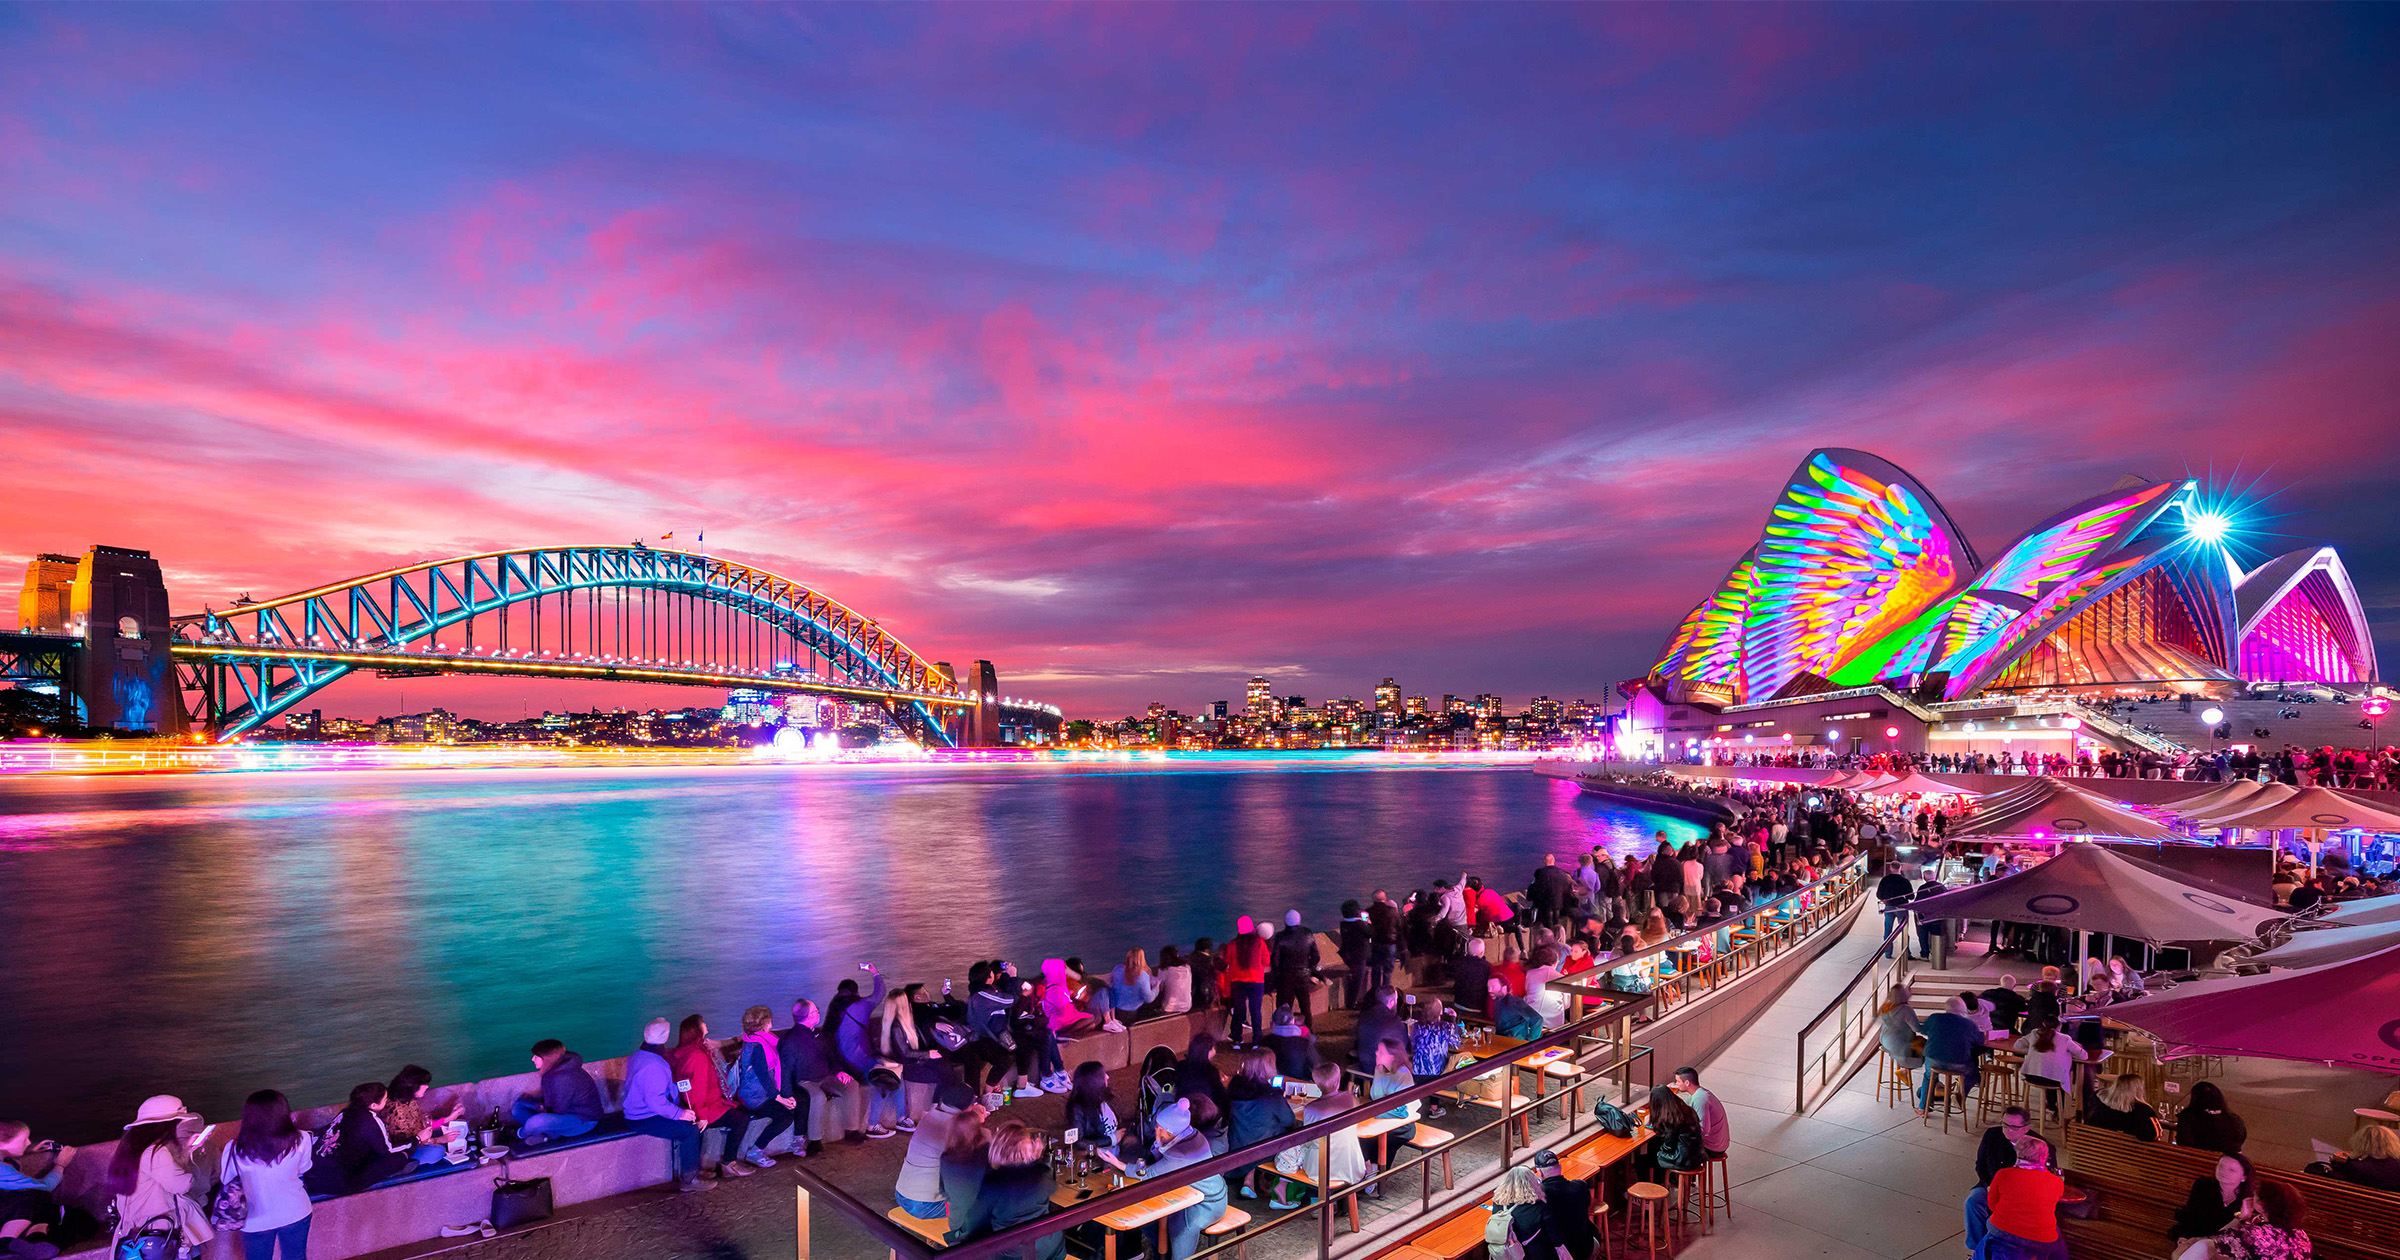 is-winter-a-good-time-to-visit-australia/